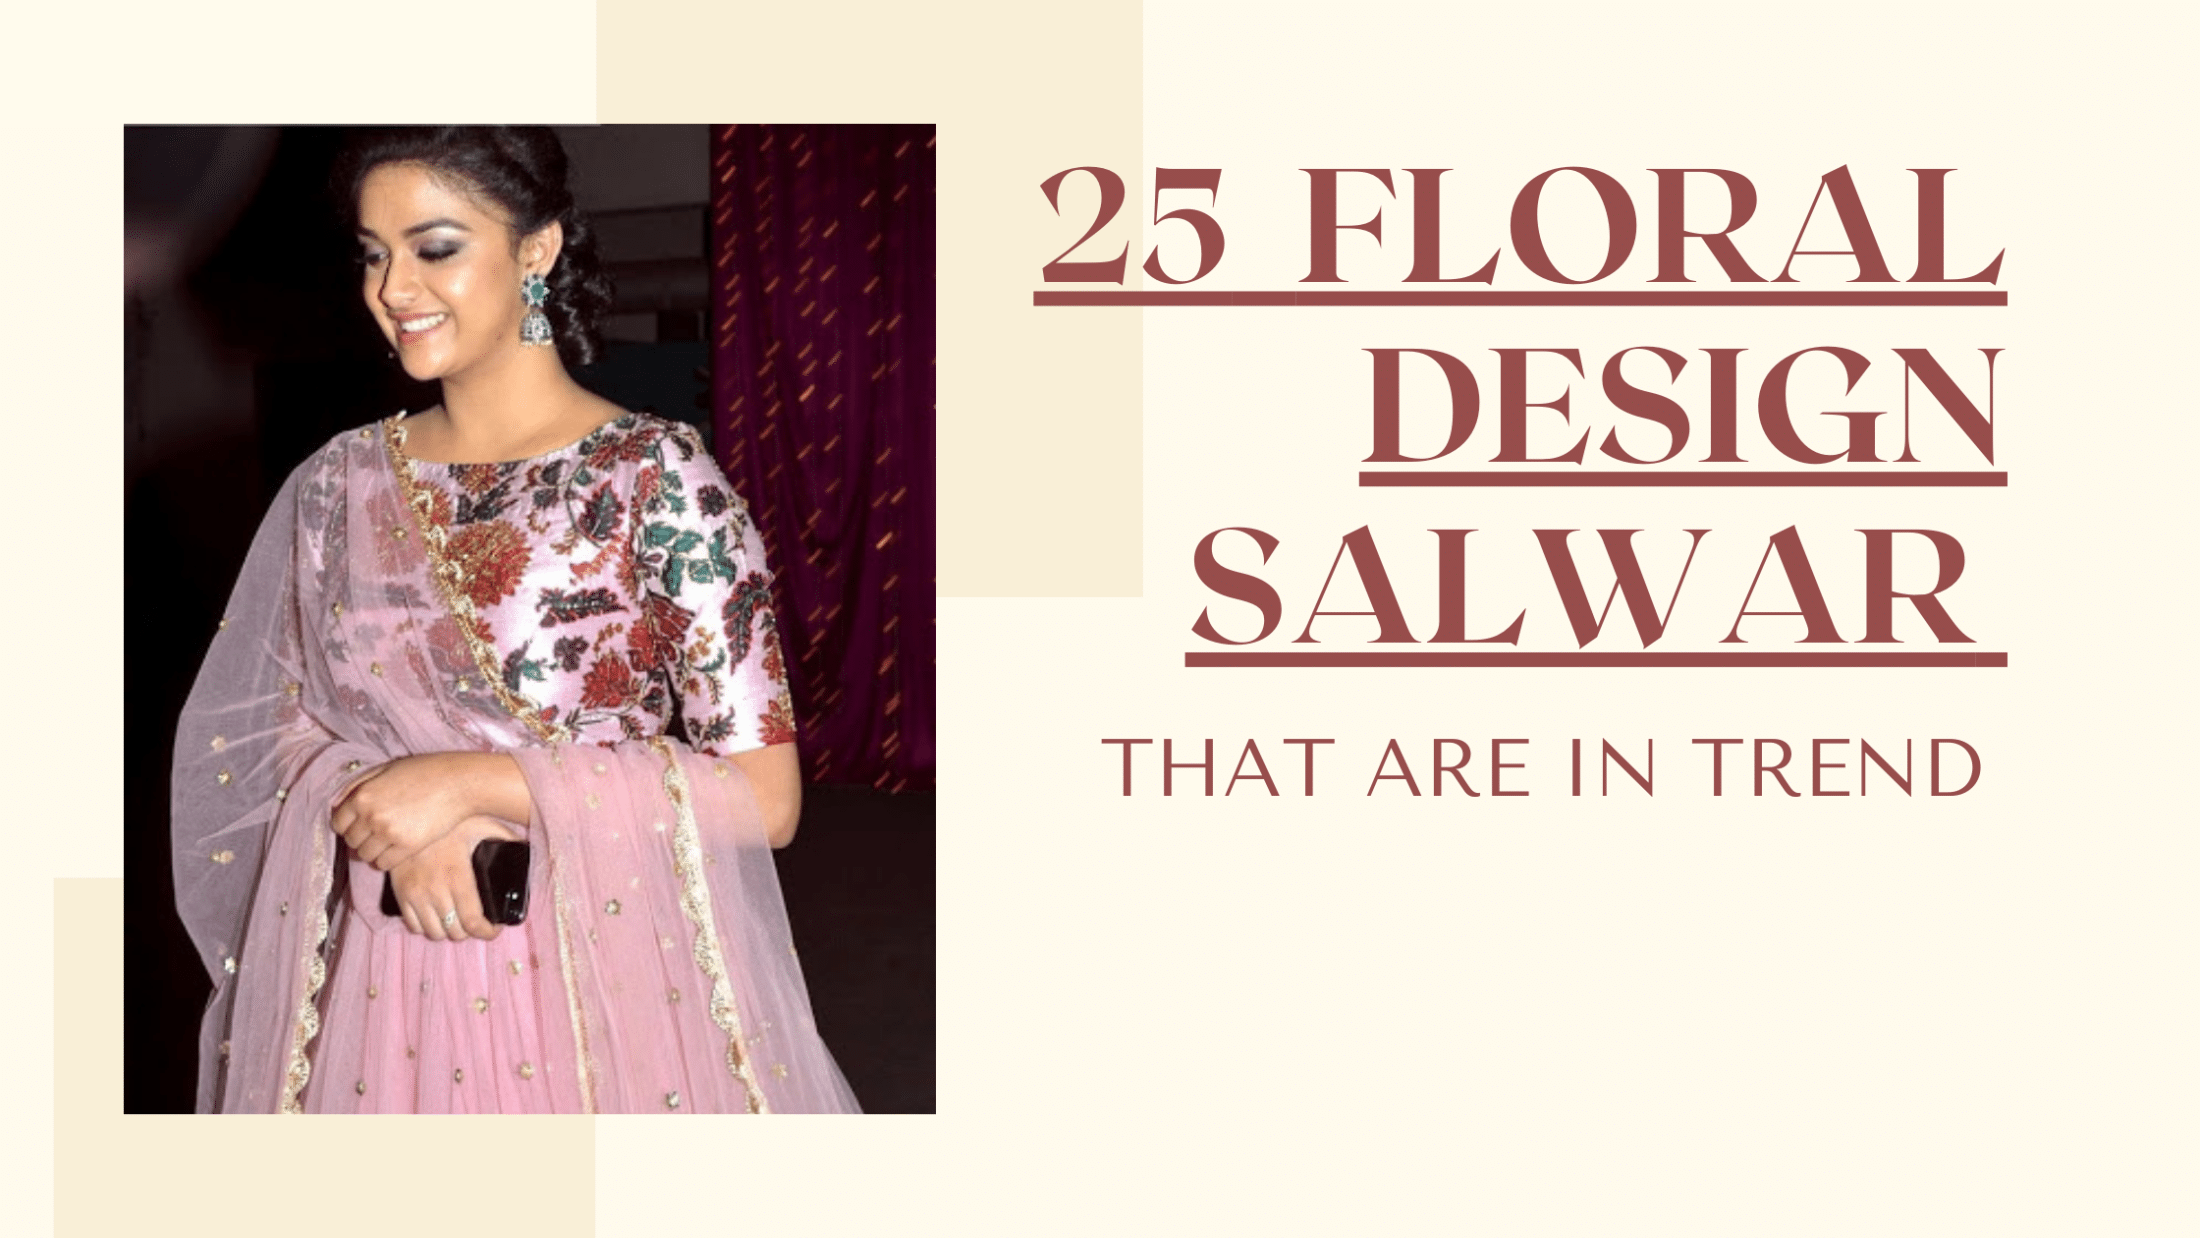 Floral Design Salwar That Are In Trend